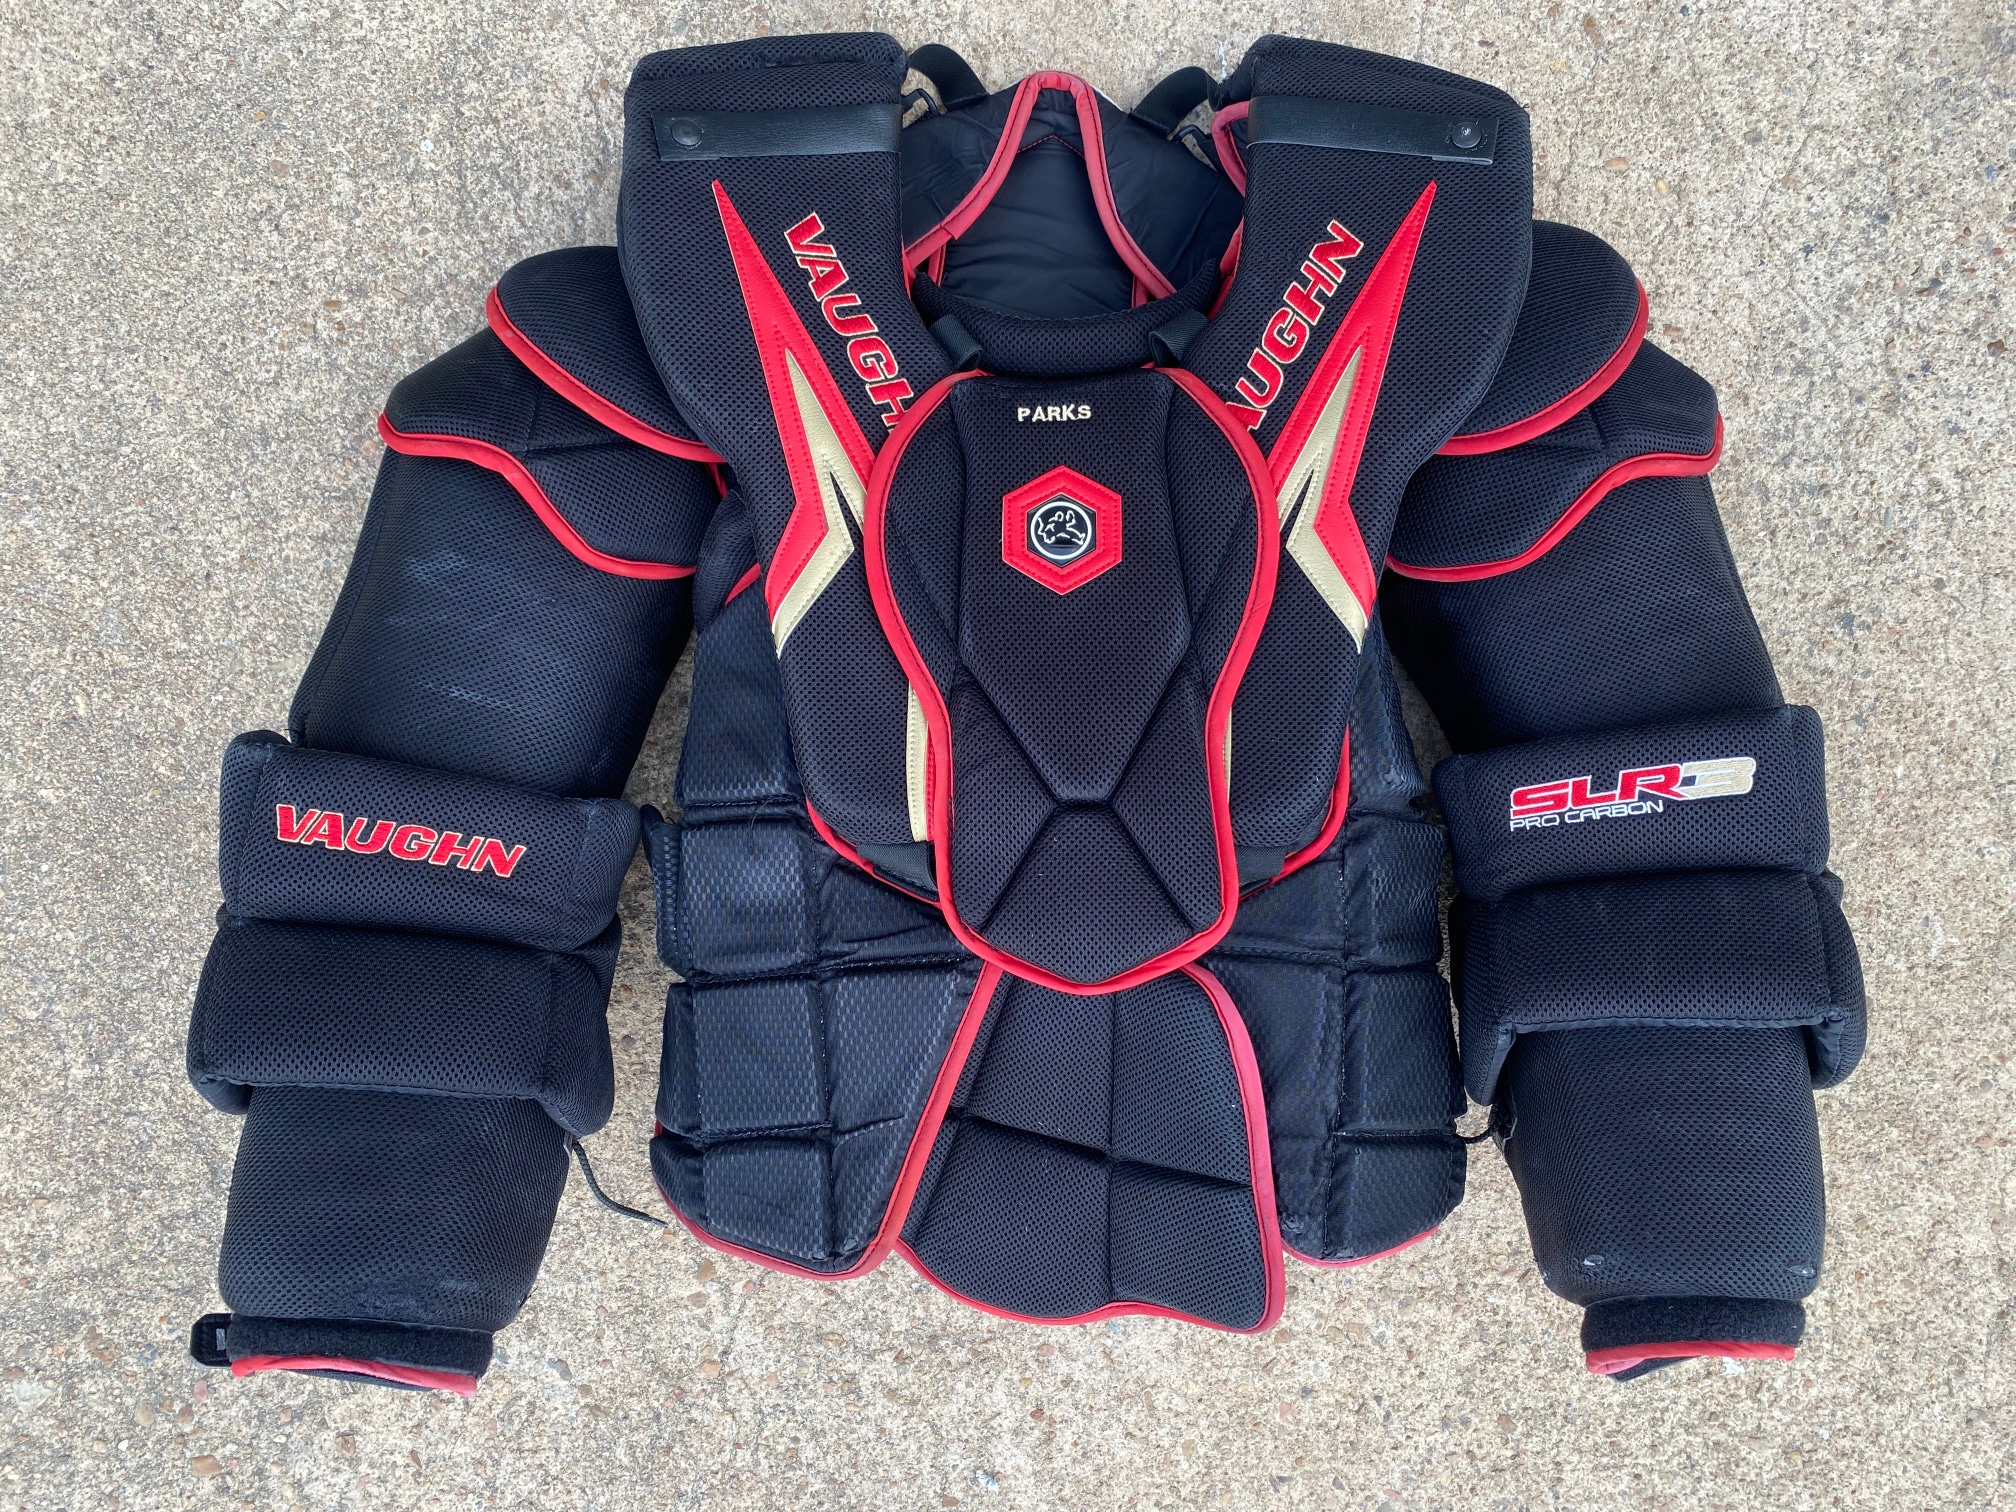 Vaughn SLR3 Pro Carbon Pro Stock Goalie Chest and Arm Protector 3784